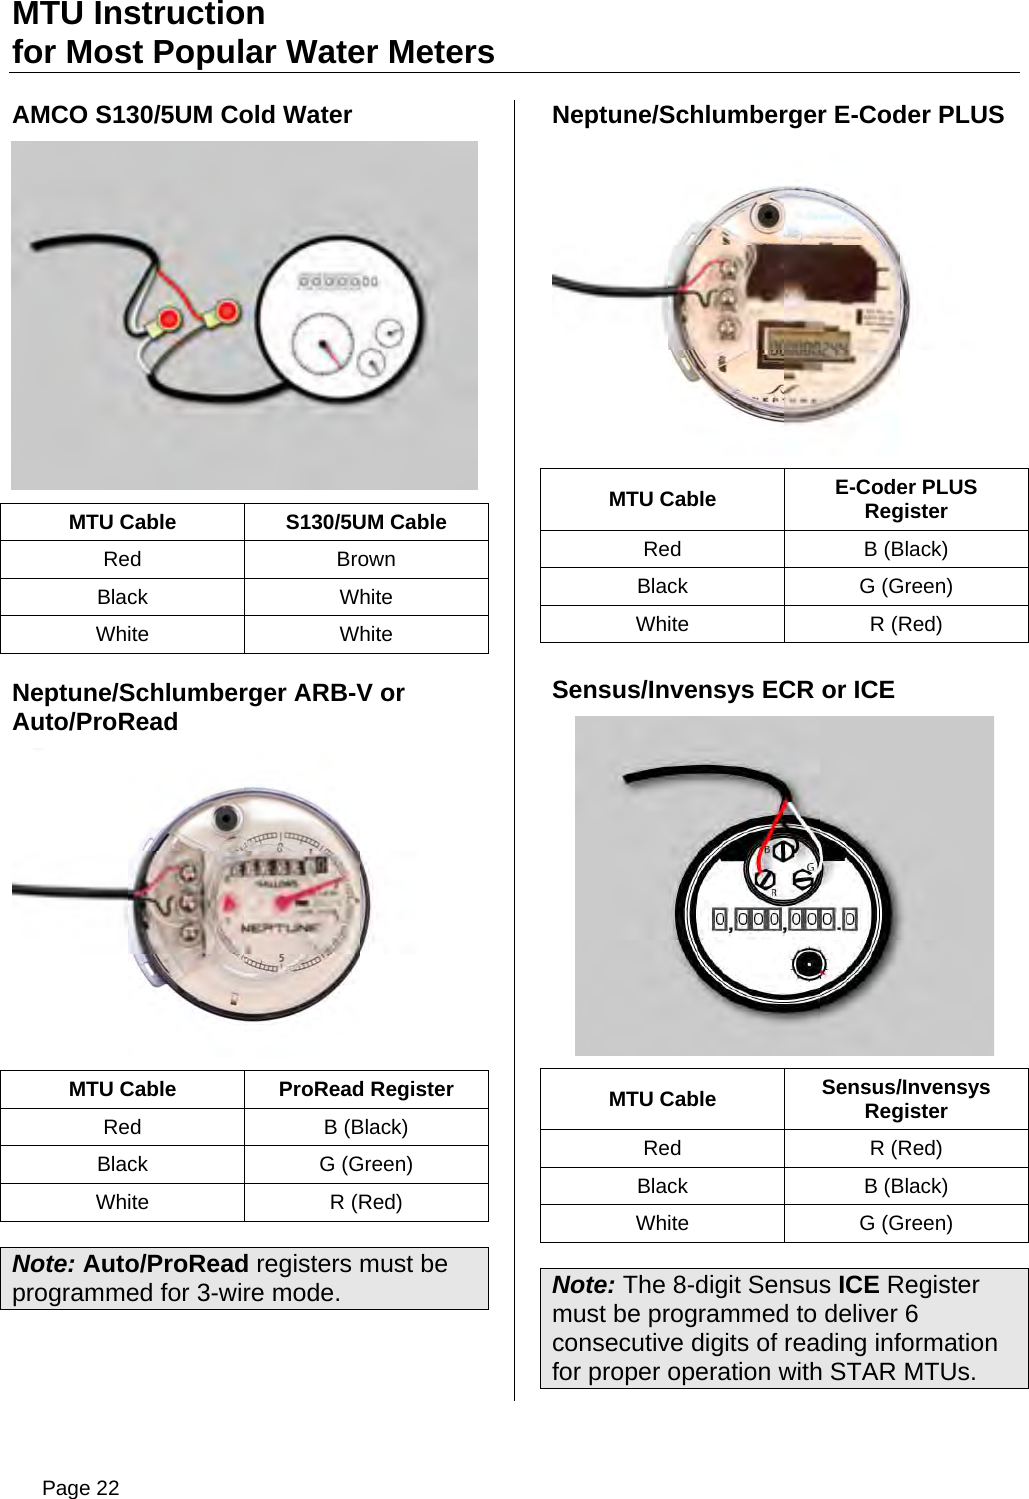 MTU Instruction for Most Popular Water Meters AMCO S130/5UM Cold Water  MTU Cable  S130/5UM Cable Red Brown Black White White White Neptune/Schlumberger ARB-V or Auto/ProRead  MTU Cable  ProRead Register Red B (Black) Black G (Green) White R (Red) Note: Auto/ProRead registers must be programmed for 3-wire mode. Neptune/Schlumberger E-Coder PLUS  MTU Cable  E-Coder PLUS Register Red B (Black) Black G (Green) White R (Red)  Sensus/Invensys ECR or ICE  MTU Cable  Sensus/Invensys Register Red R (Red) Black B (Black) White G (Green) Note: The 8-digit Sensus ICE Register must be programmed to deliver 6 consecutive digits of reading information for proper operation with STAR MTUs.  Page 22